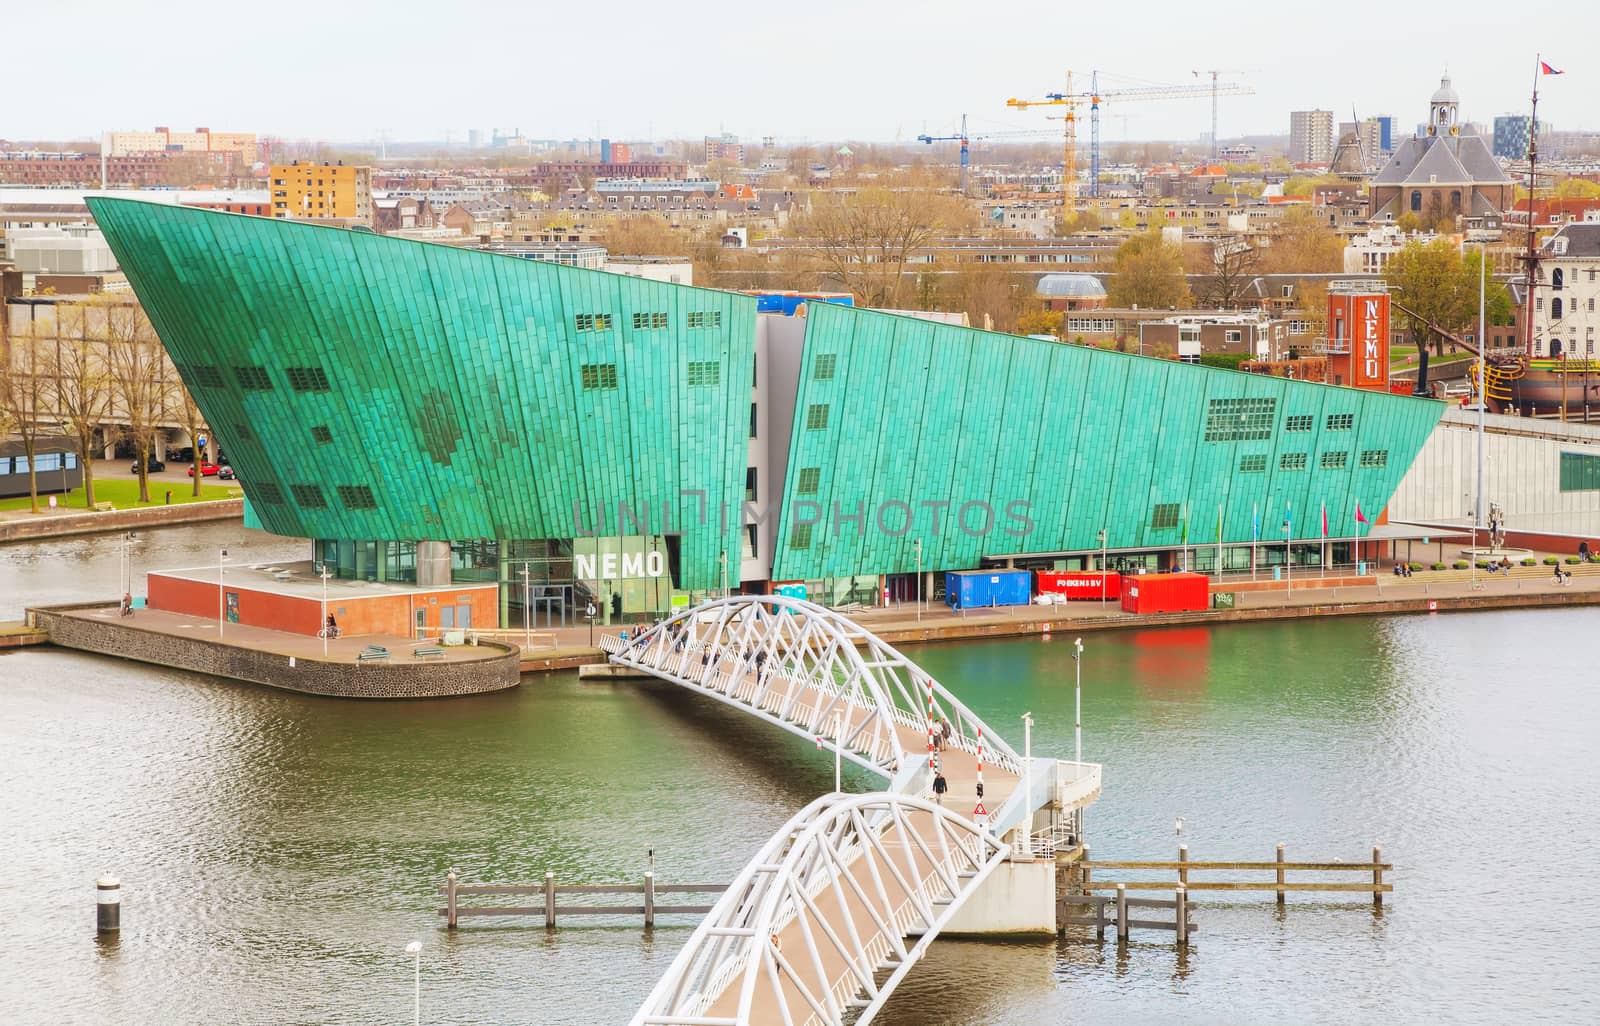 Science Center Nemo building in Amsterdam by AndreyKr